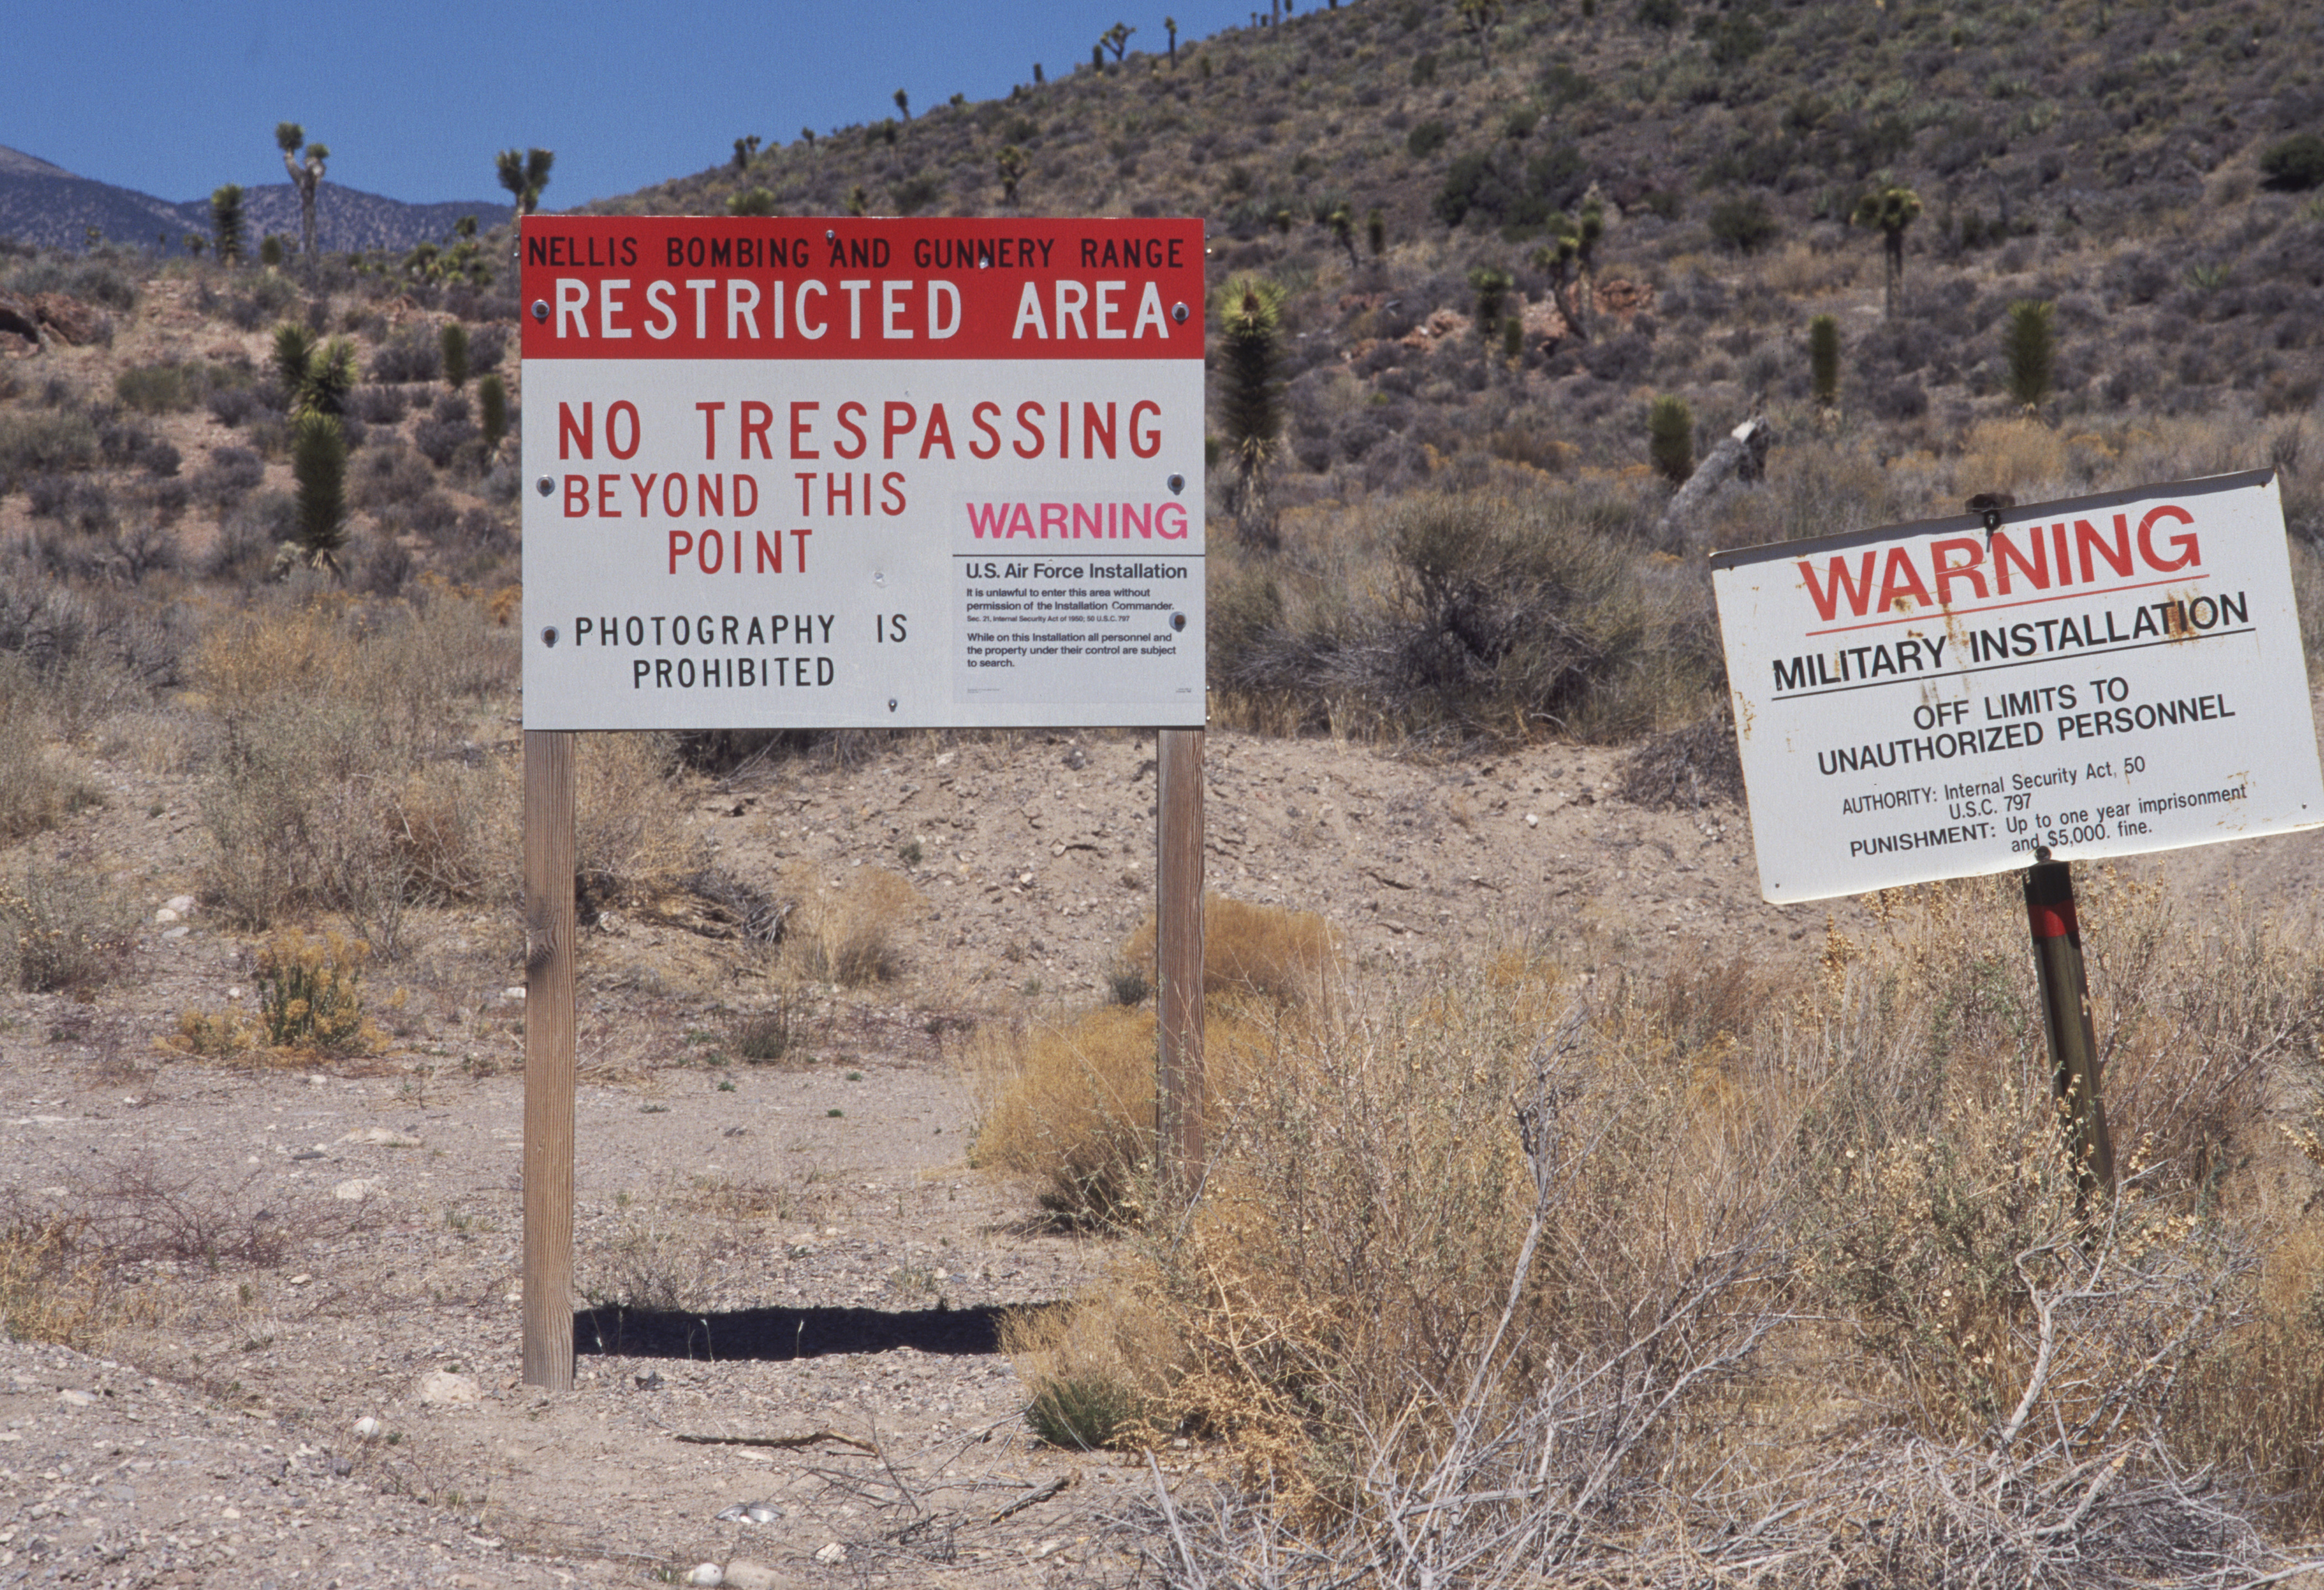 UFOs_Area-51_restricted-military-area-known-for-alien-incident_Corbis.jpg